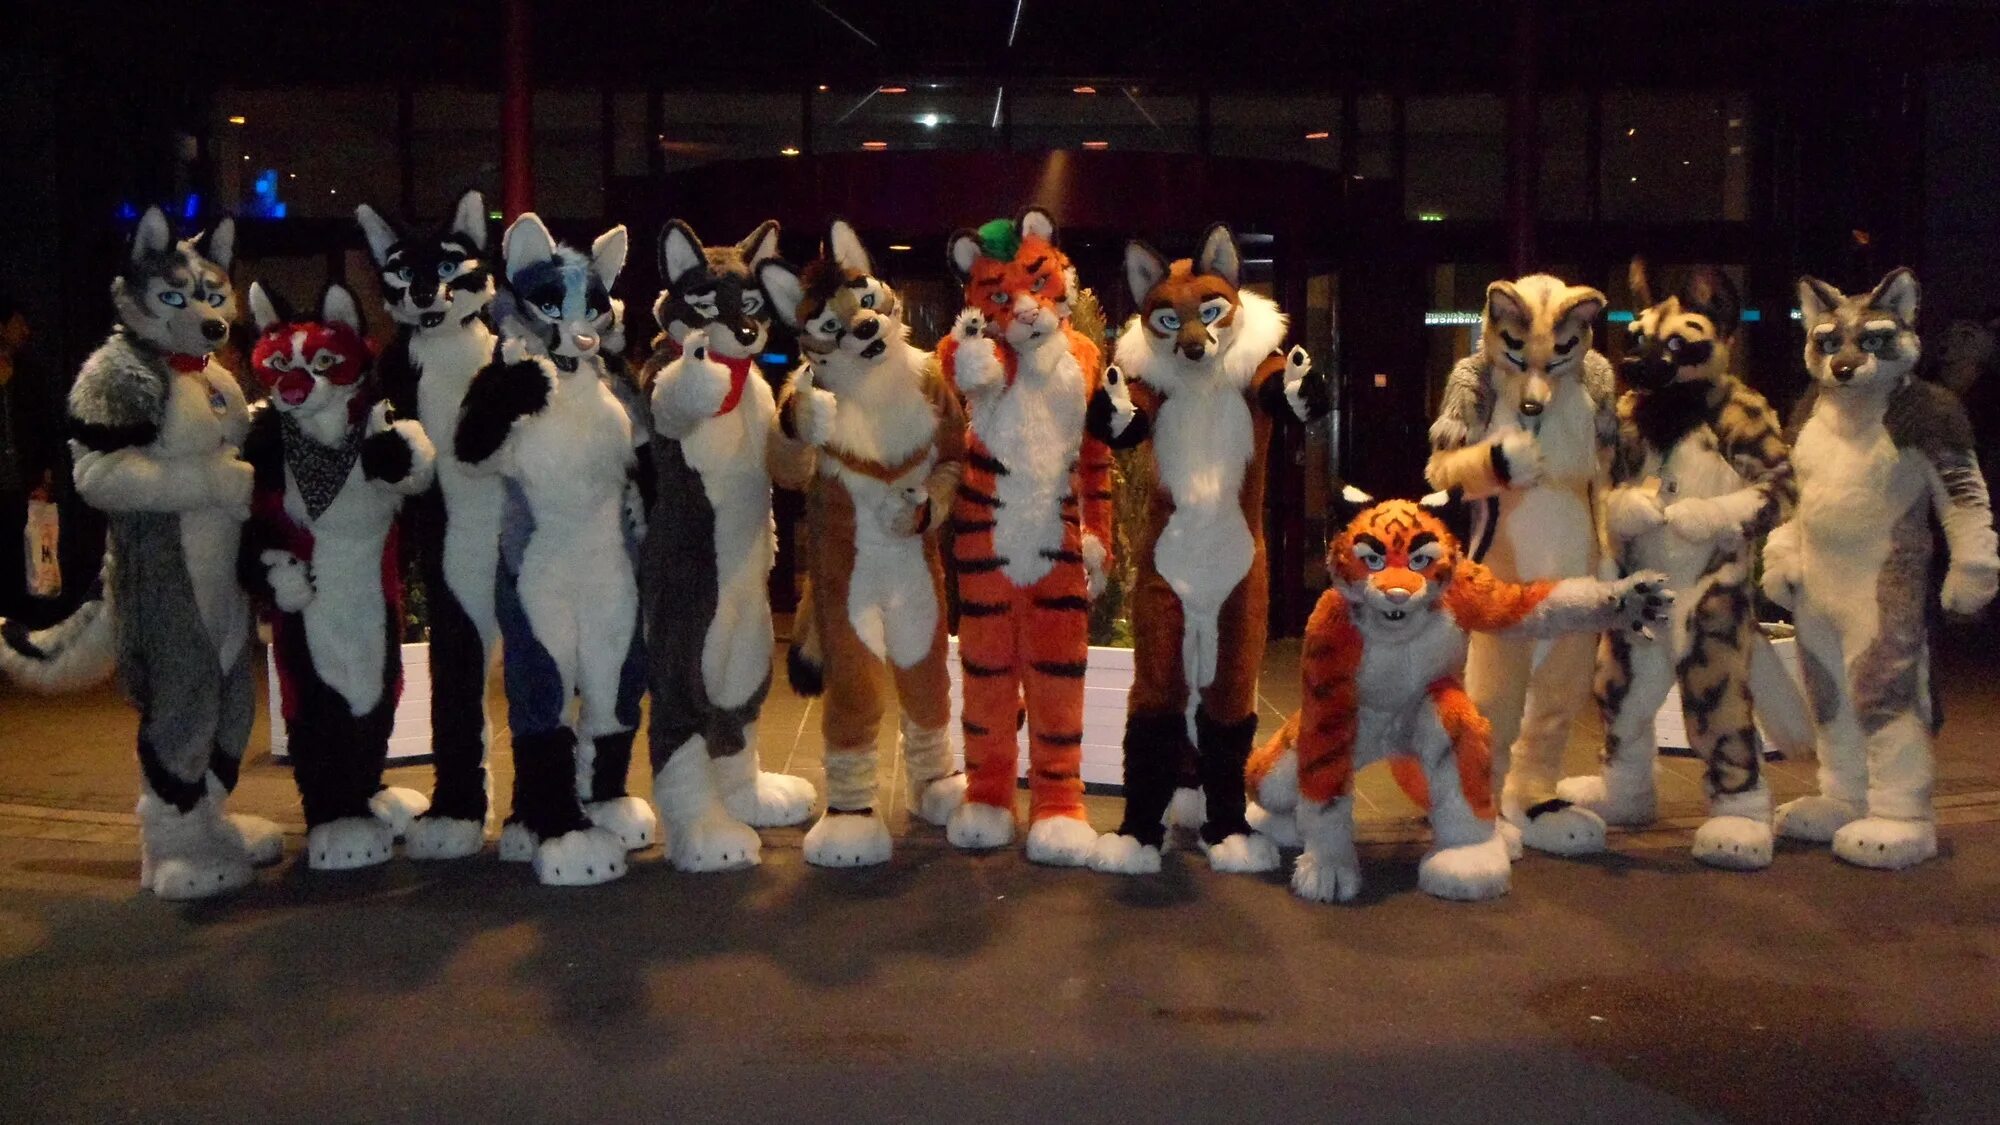 The paw's element. Eurofurence. The Paws element. The Paws element концерт.